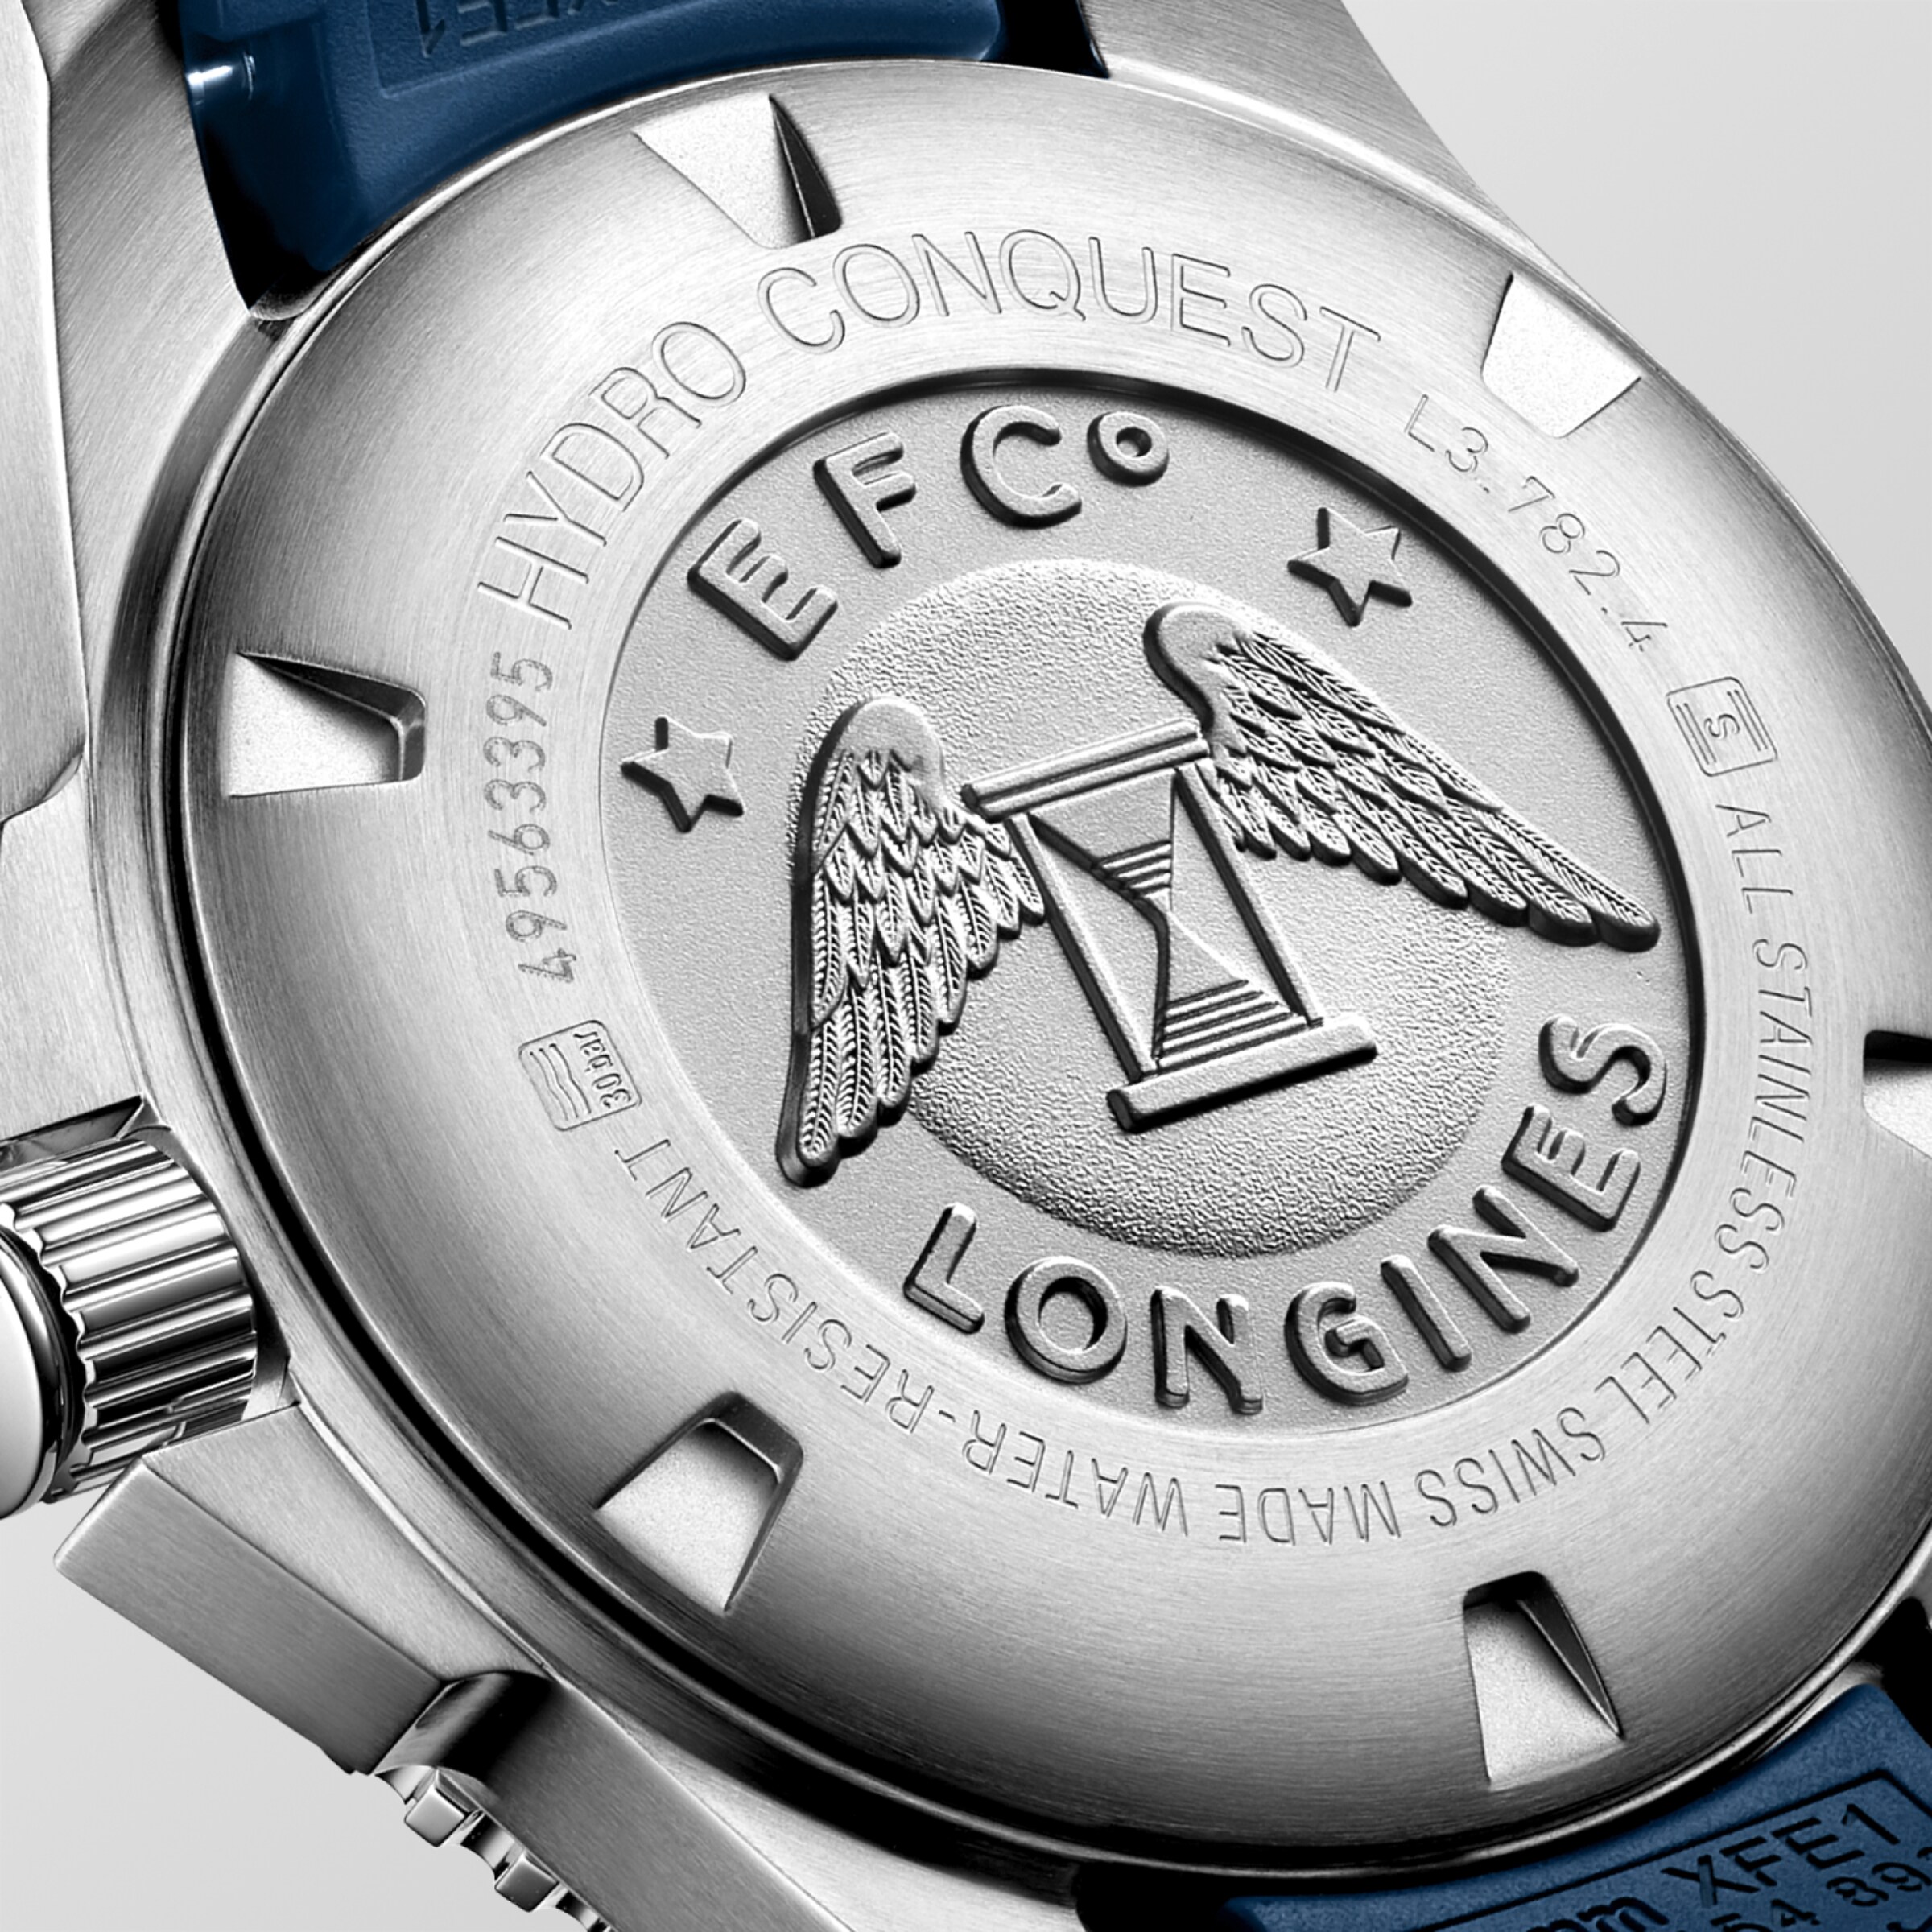 Longines HYDROCONQUEST Automatic Stainless steel and ceramic bezel Watch - L3.782.4.96.9